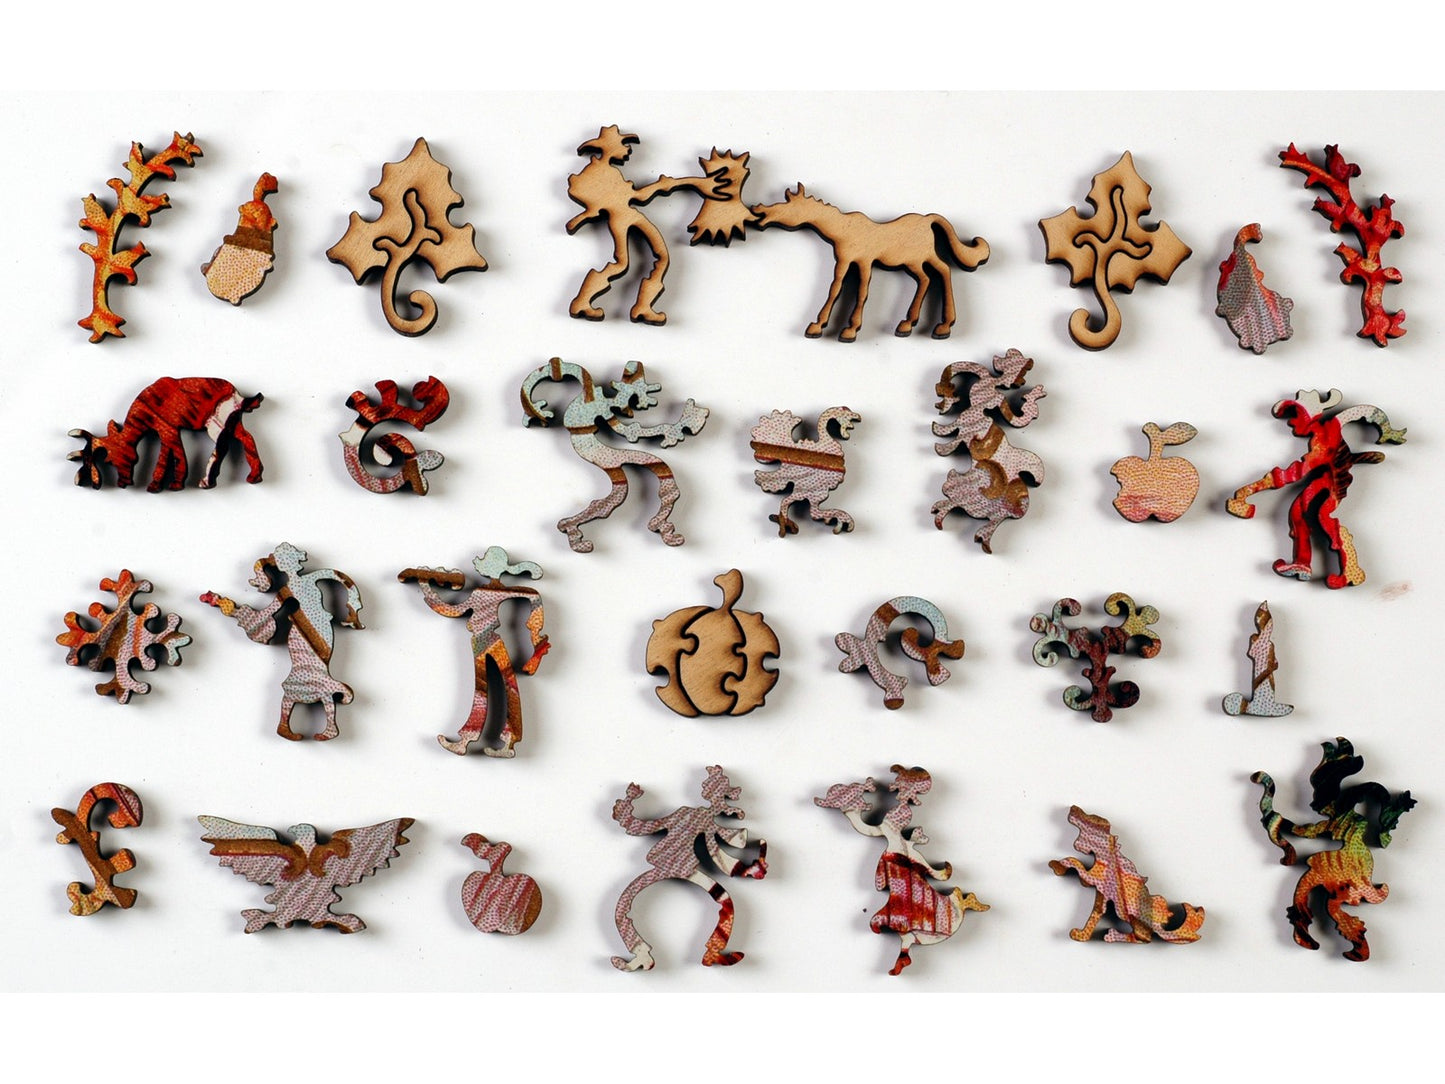 The whimsy pieces that can be found in the puzzle, Thanksgiving Greeting.